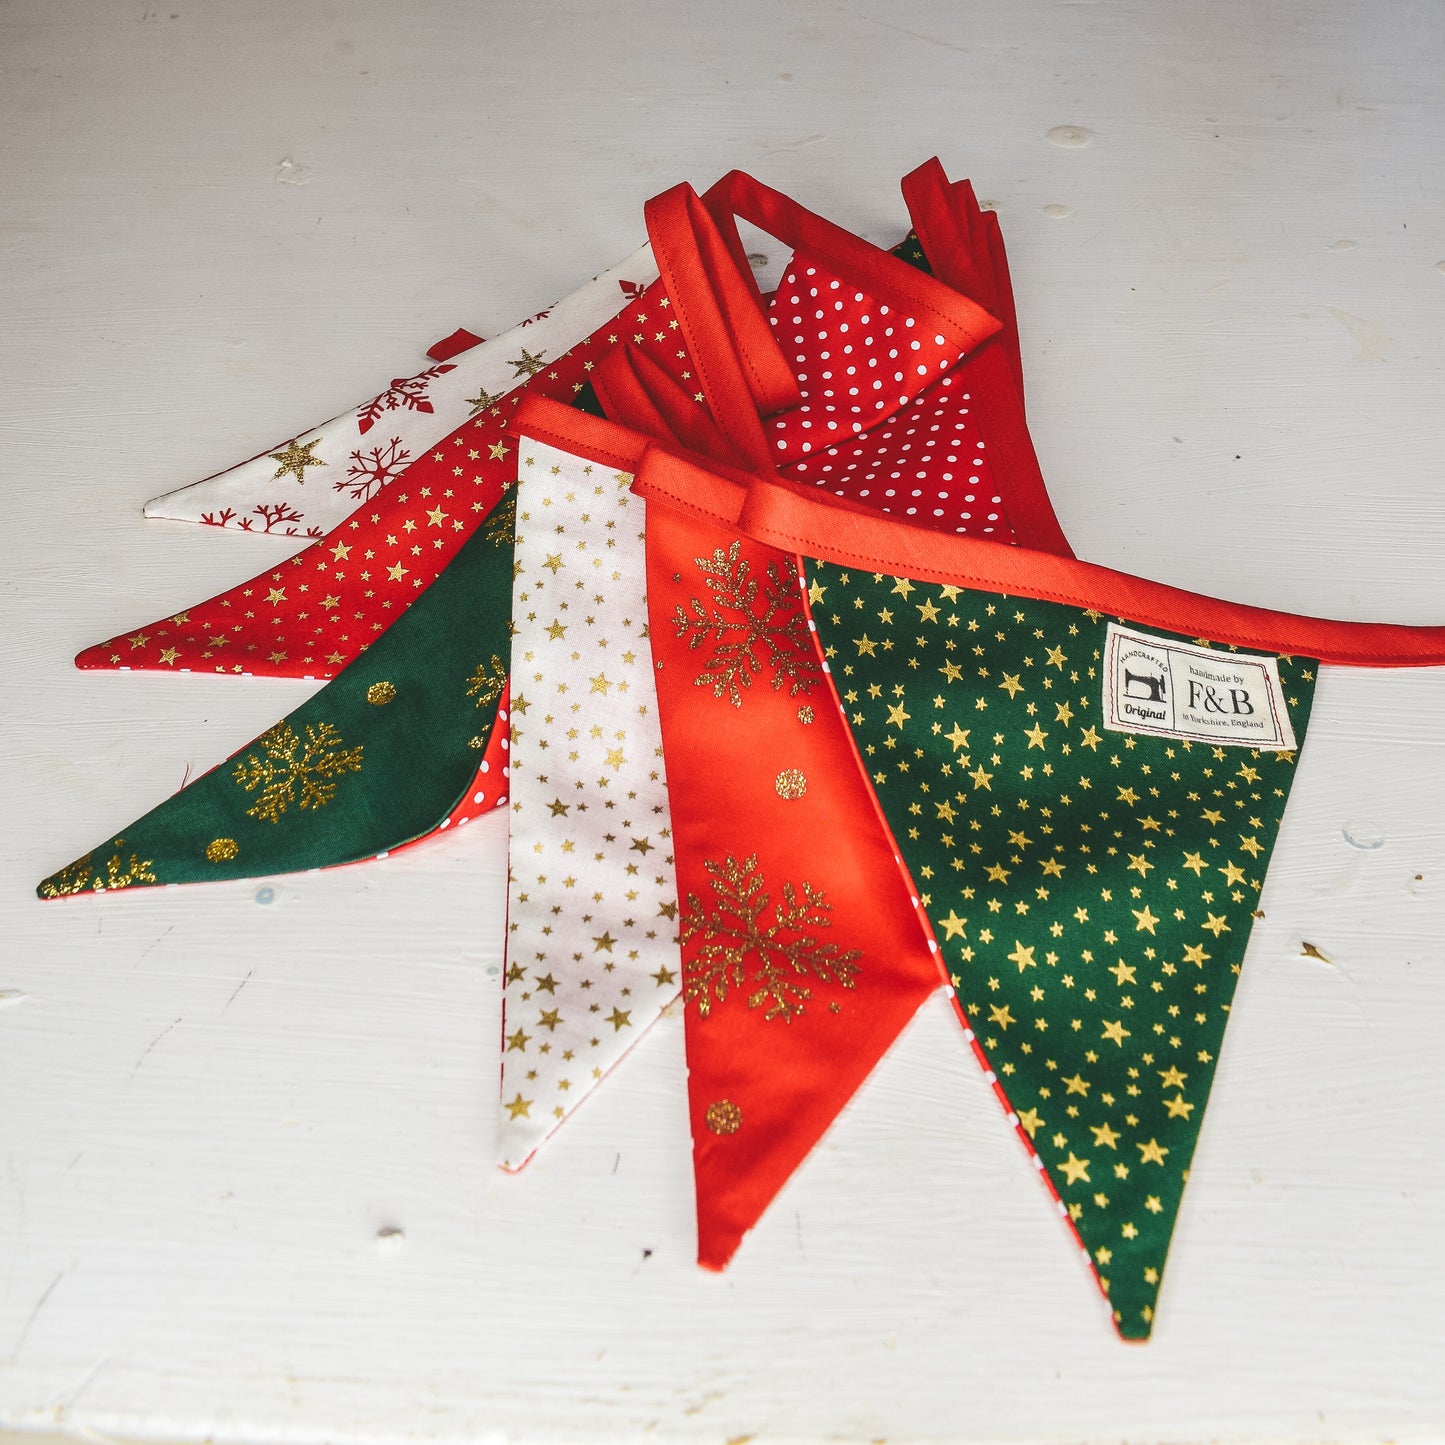 Red and Green Christmas Bunting Handmade by F&B featuring stars and snowflakes on christmas colours 3m in length